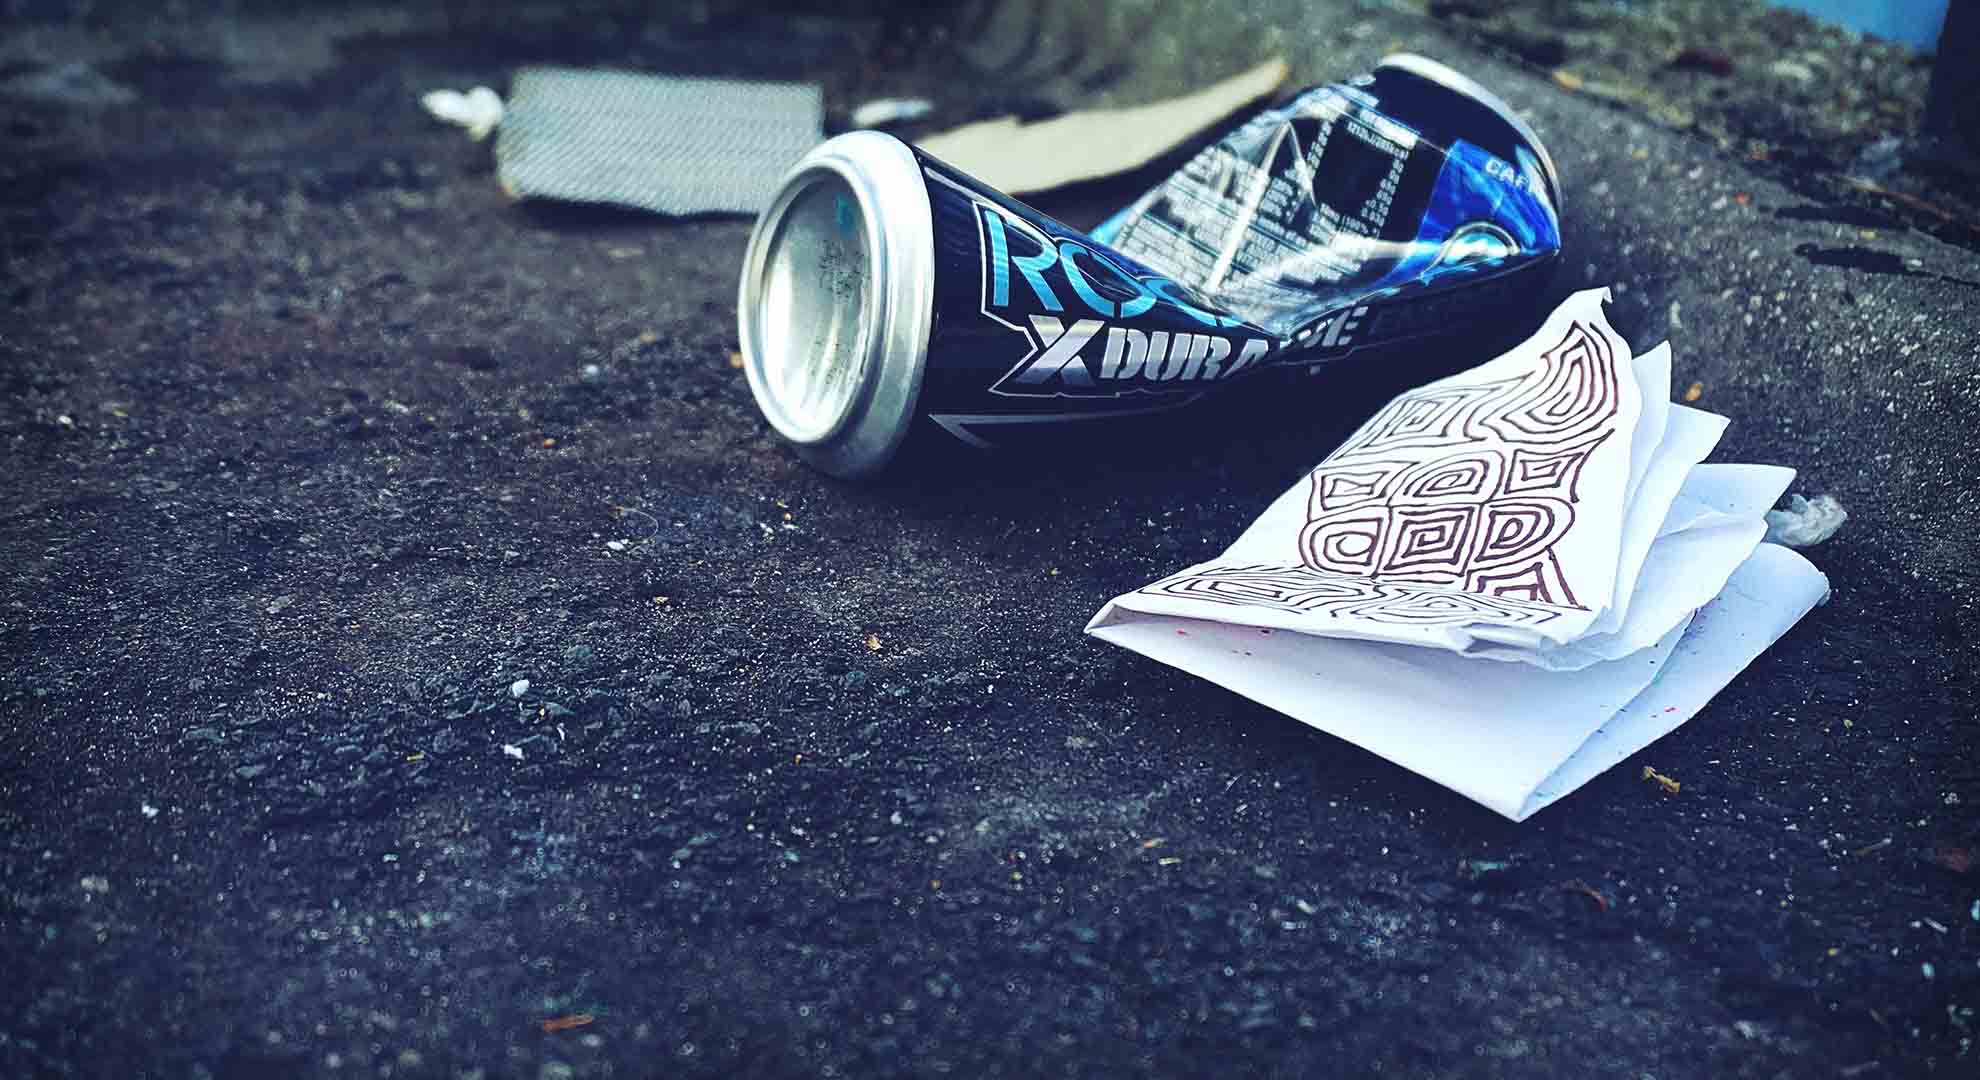 An empty can and napkin left on a pavement